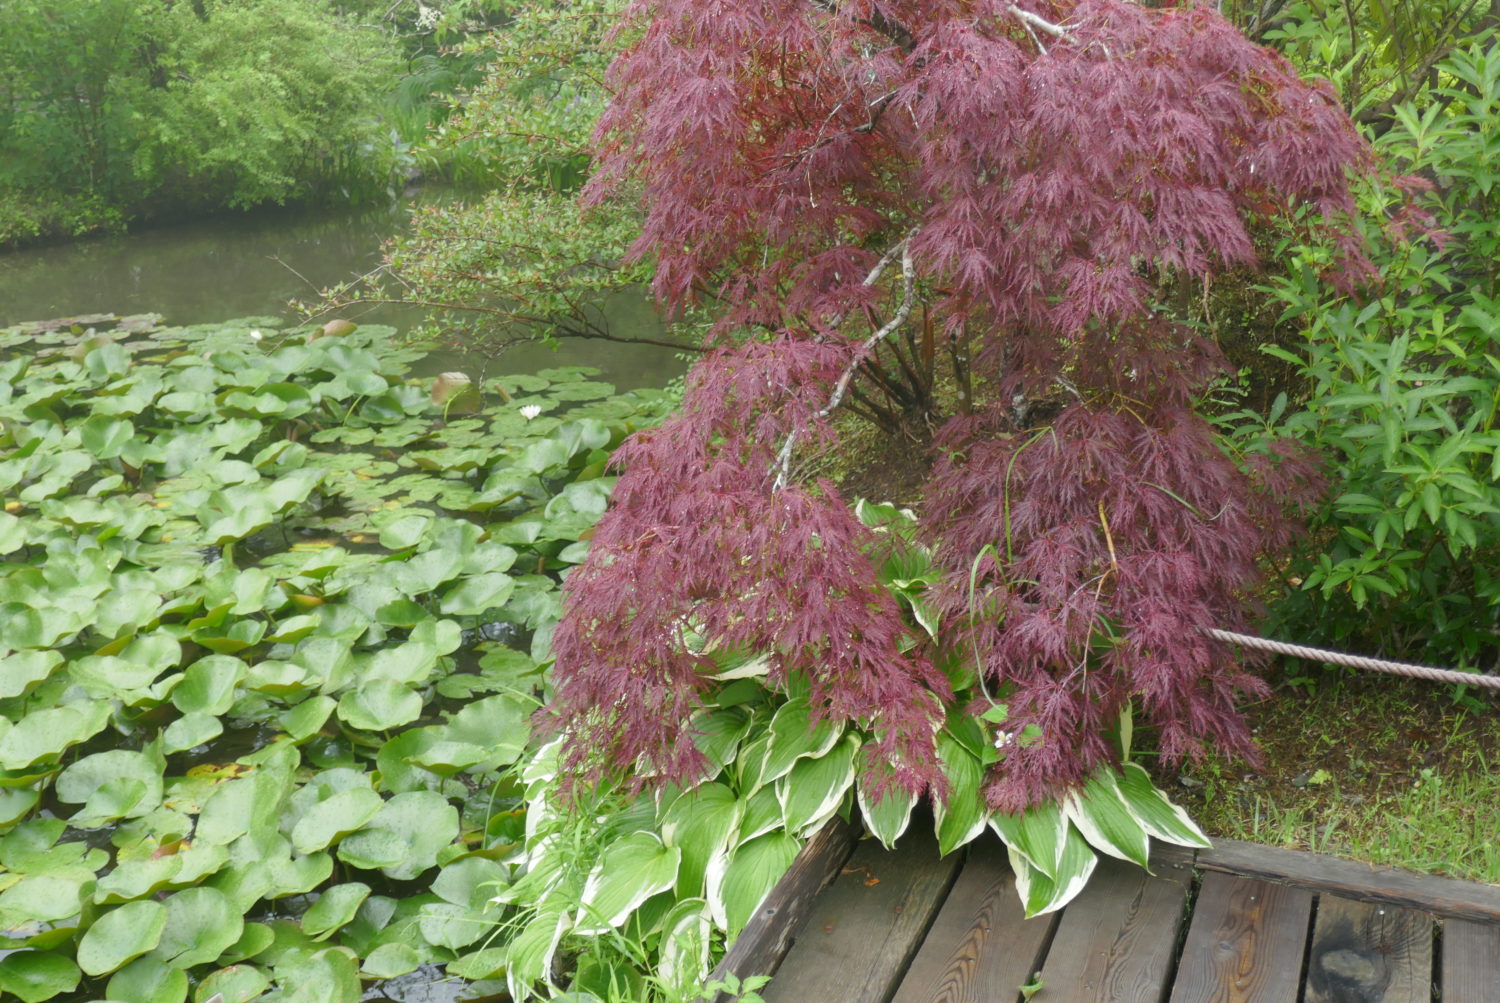 Red weeping maple, variegated Hosta and water lilies